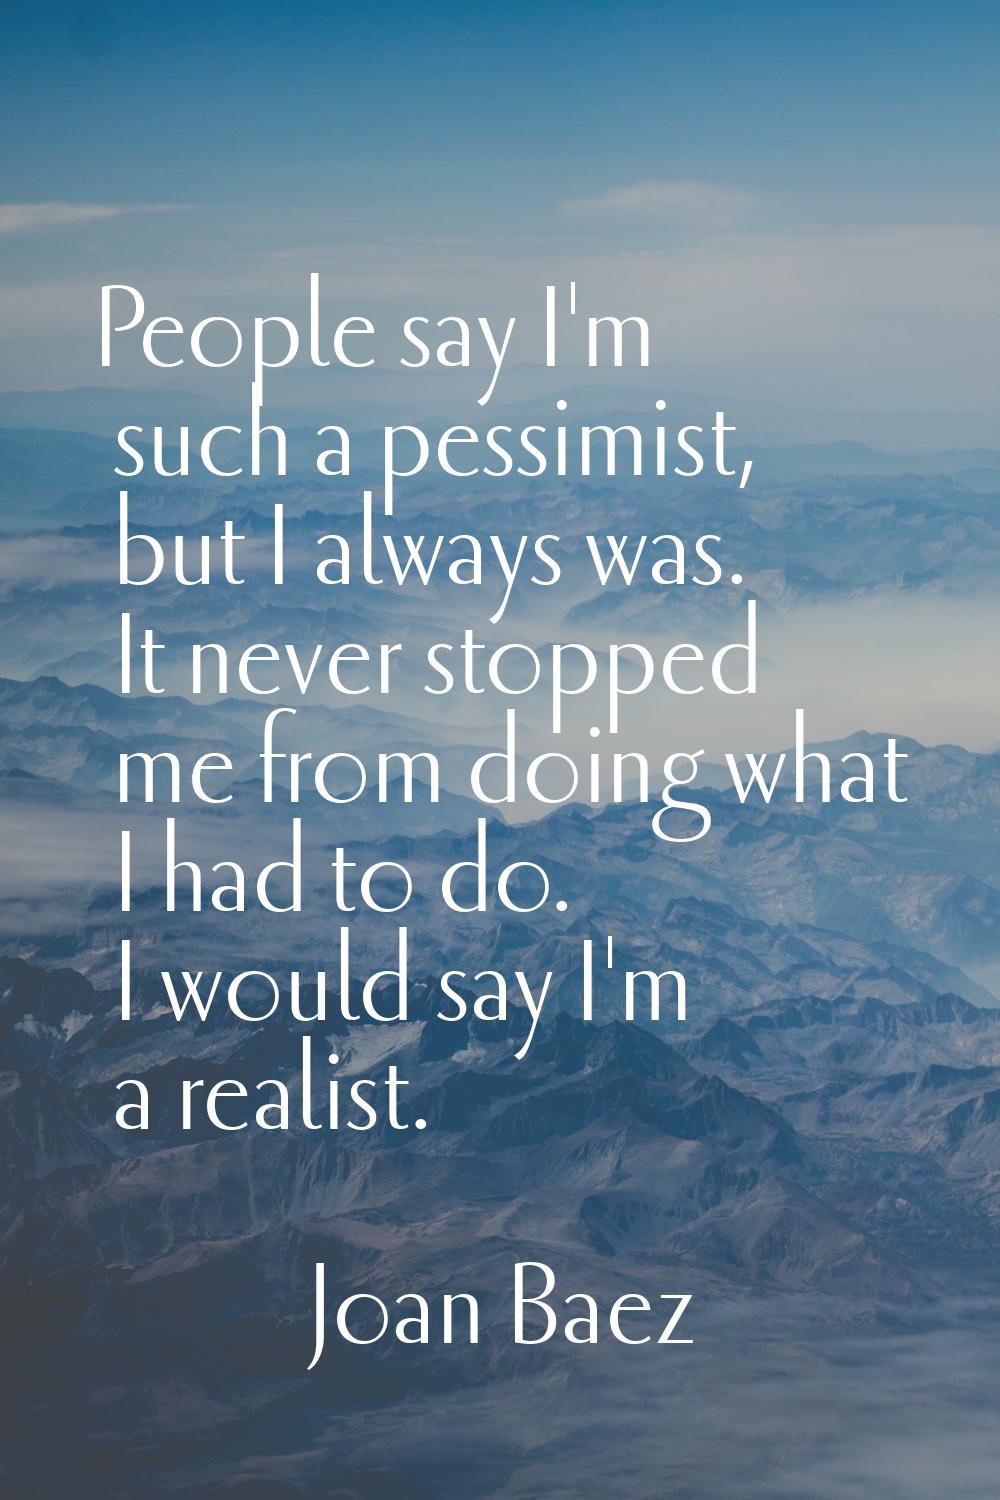 People say I'm such a pessimist, but I always was. It never stopped me from doing what I had to do.